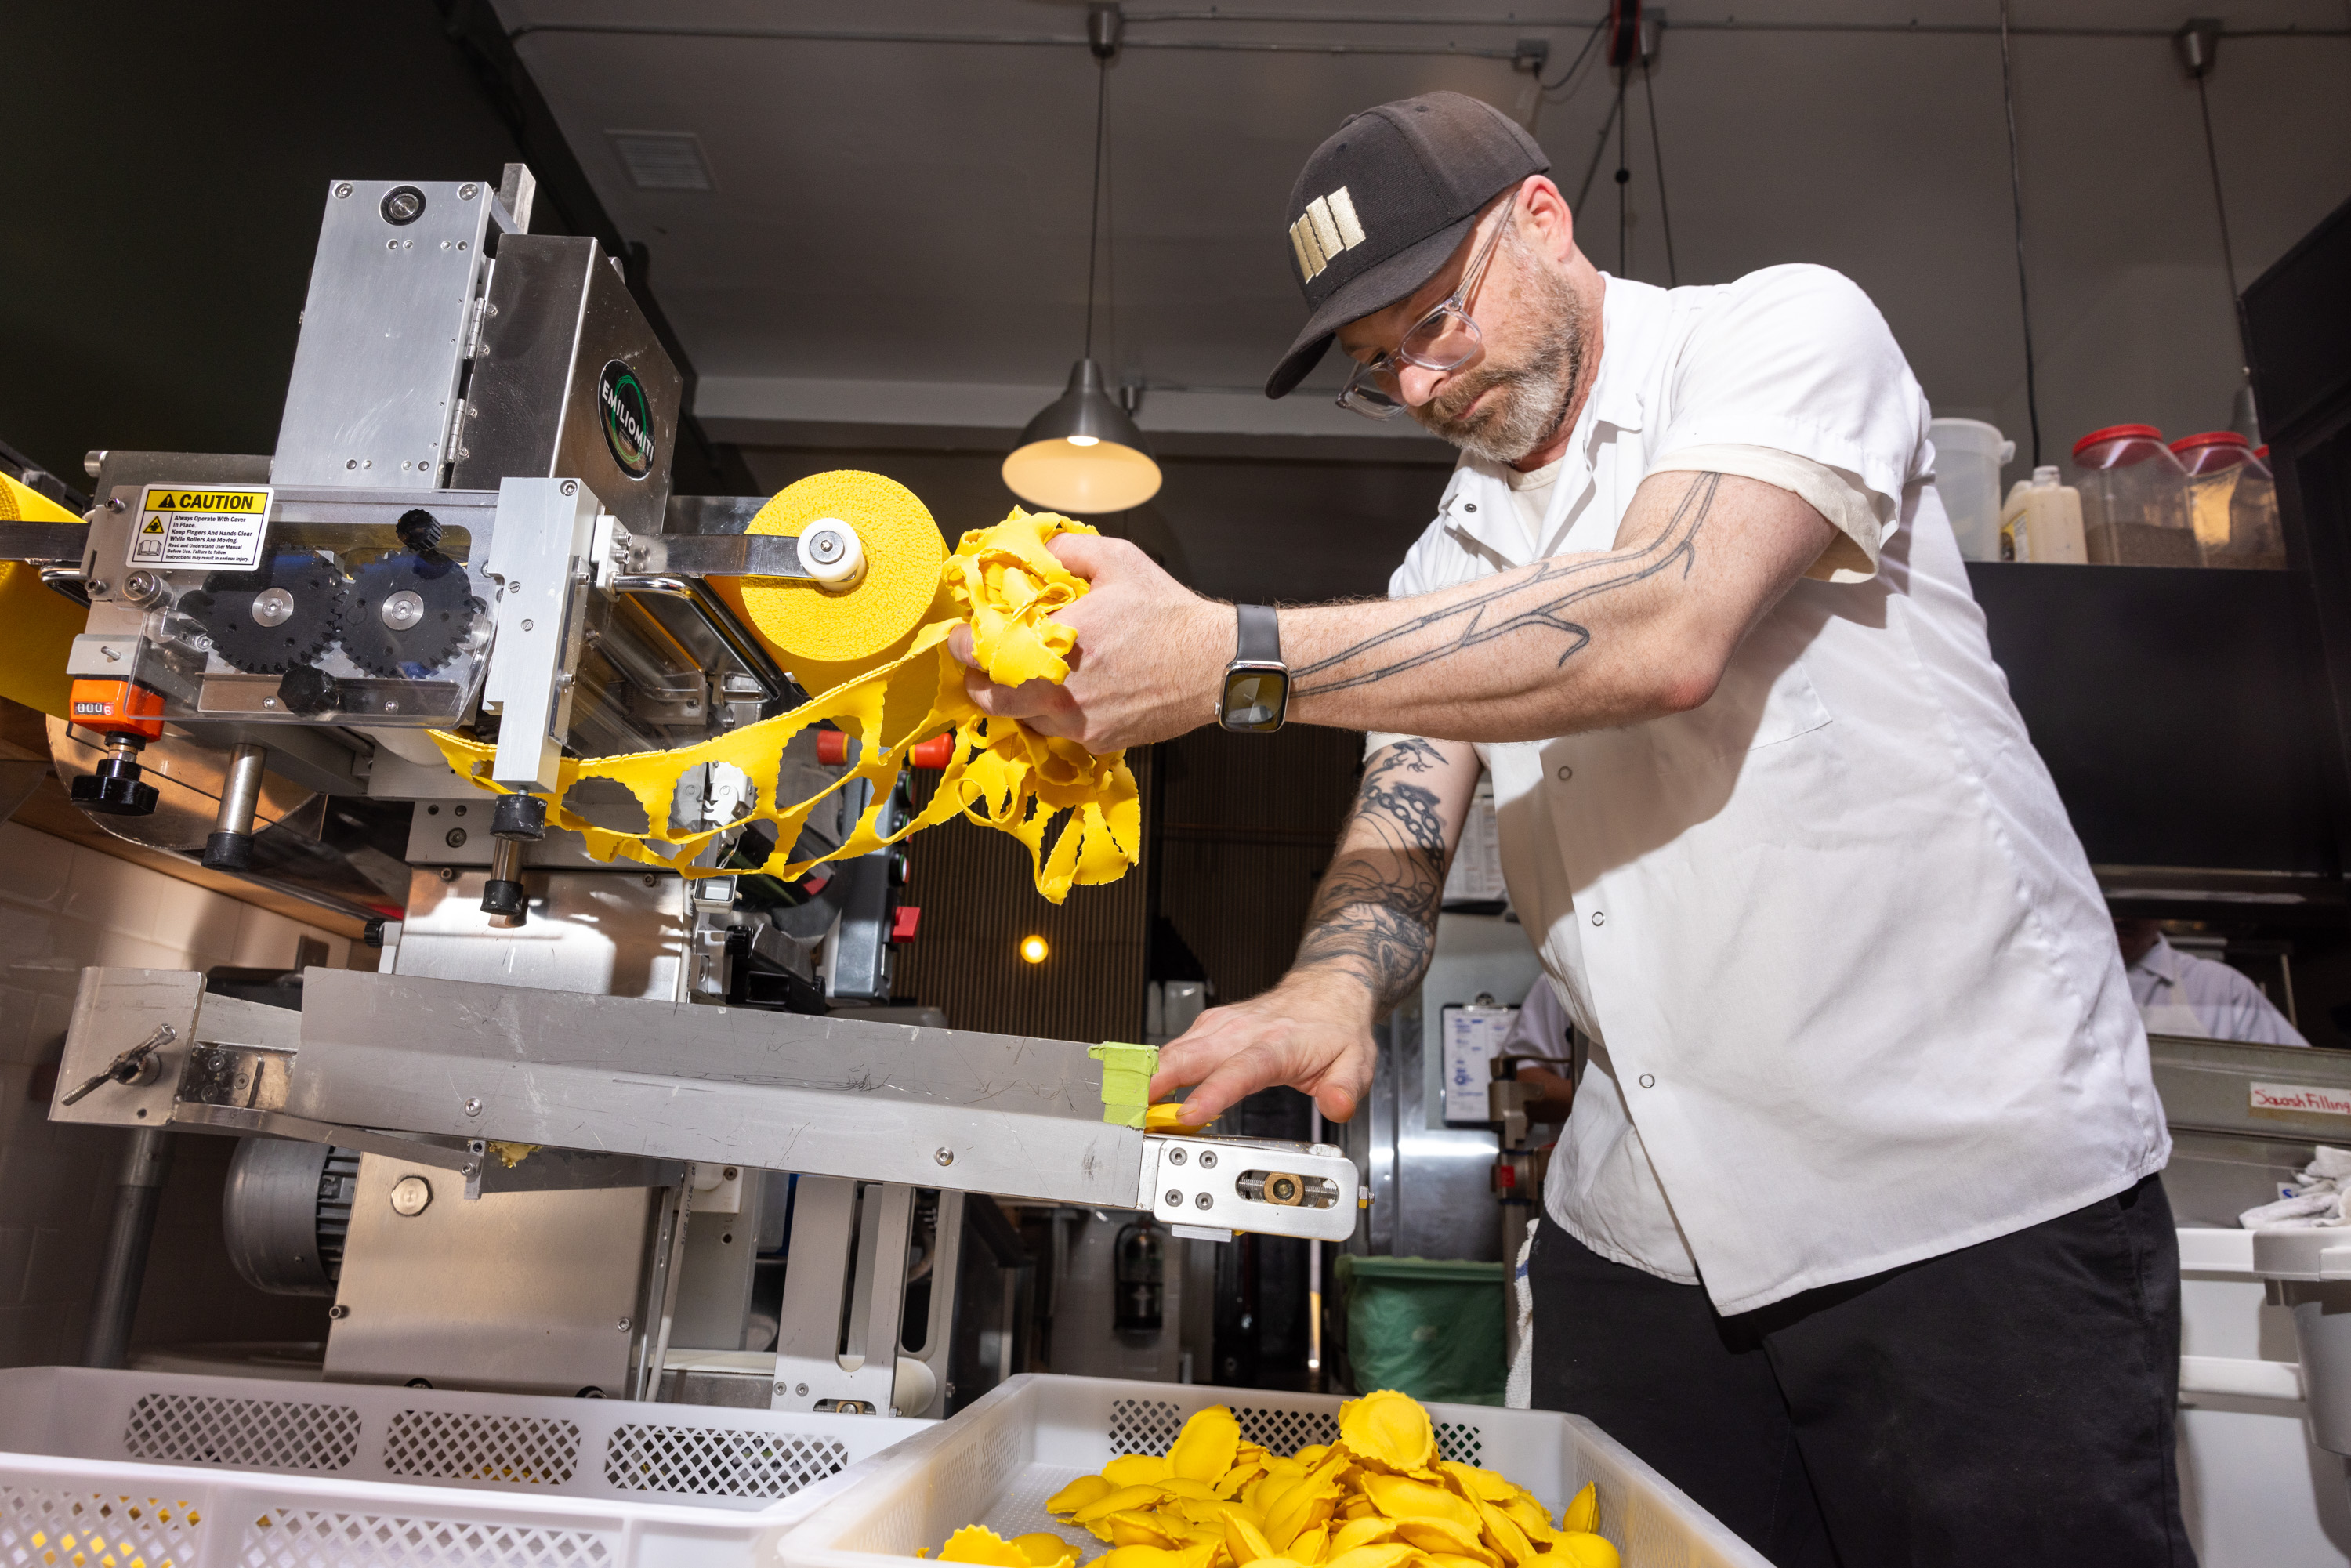 A man operates a pasta-making machine, feeding yellow pasta sheets into it. He's wearing a cap and glasses and is surrounded by bins containing yellow pasta.